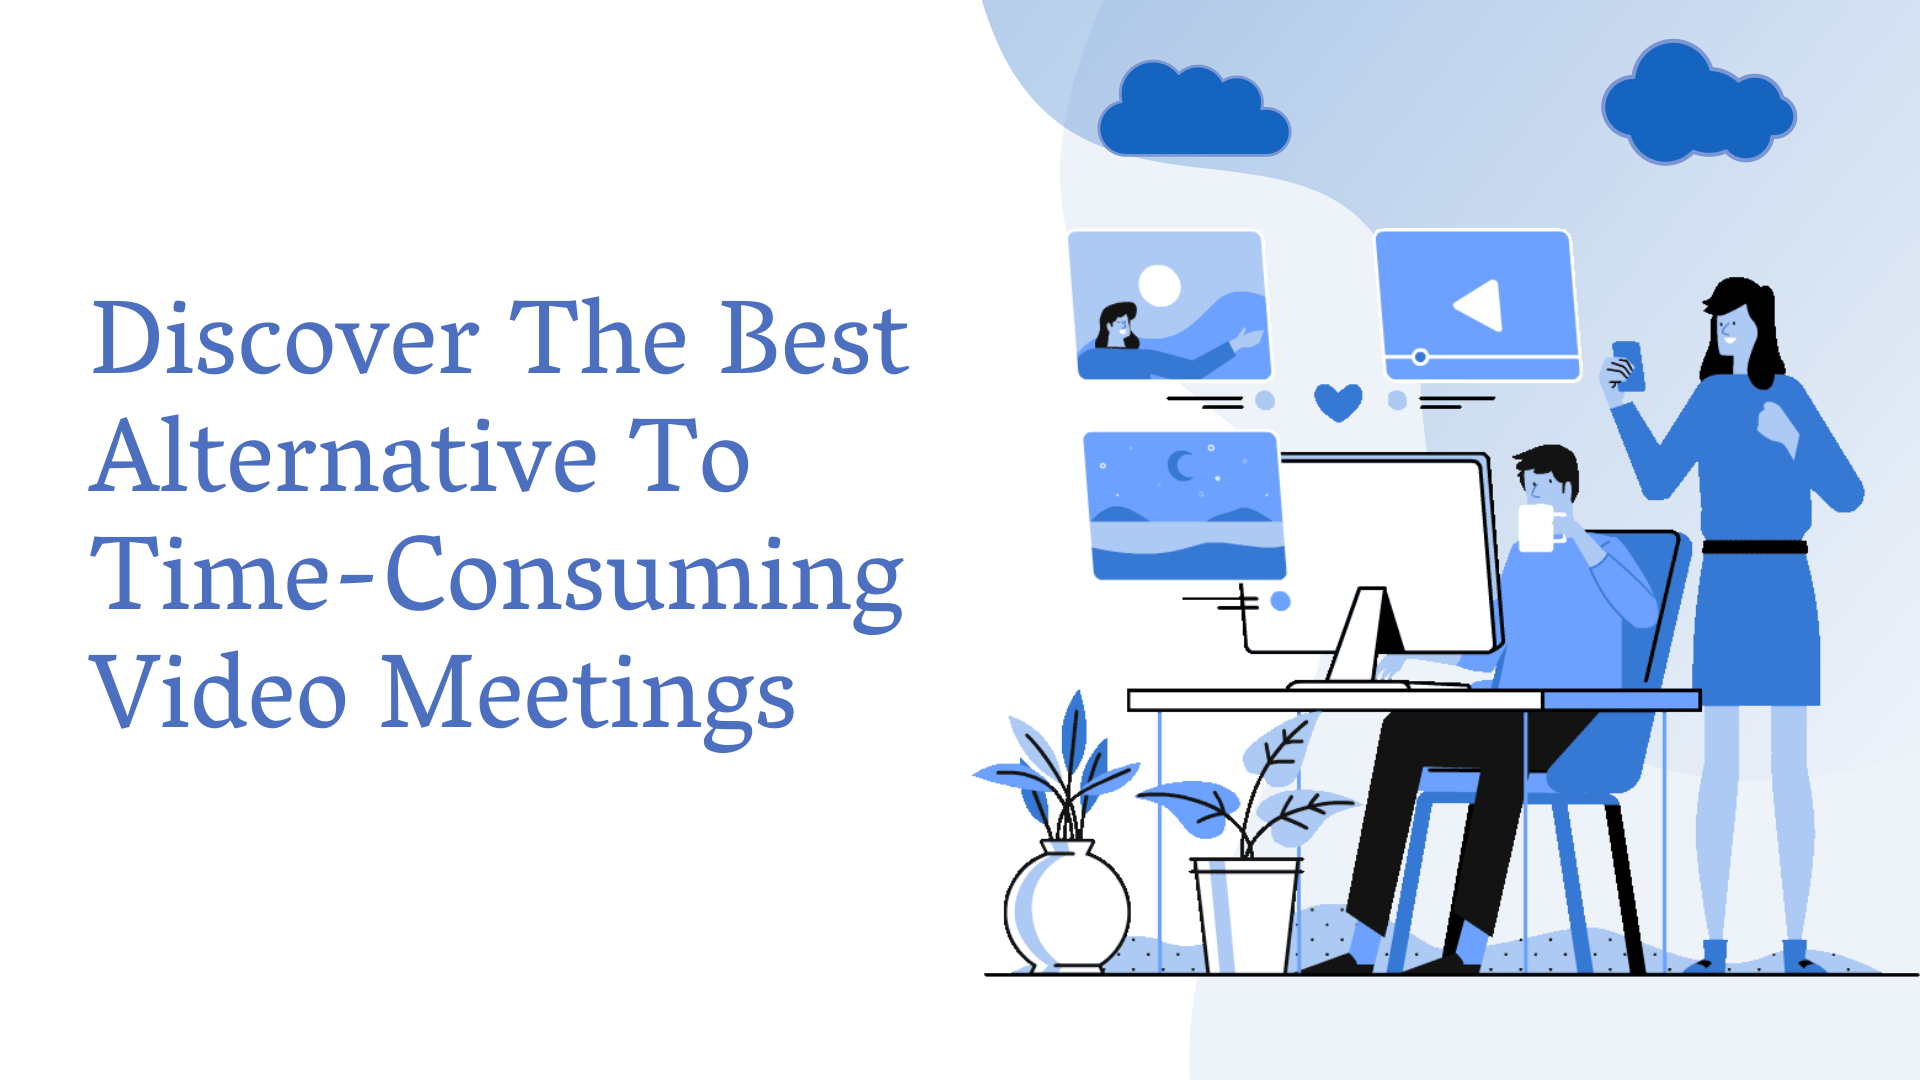 Time-Consuming Video Meetings